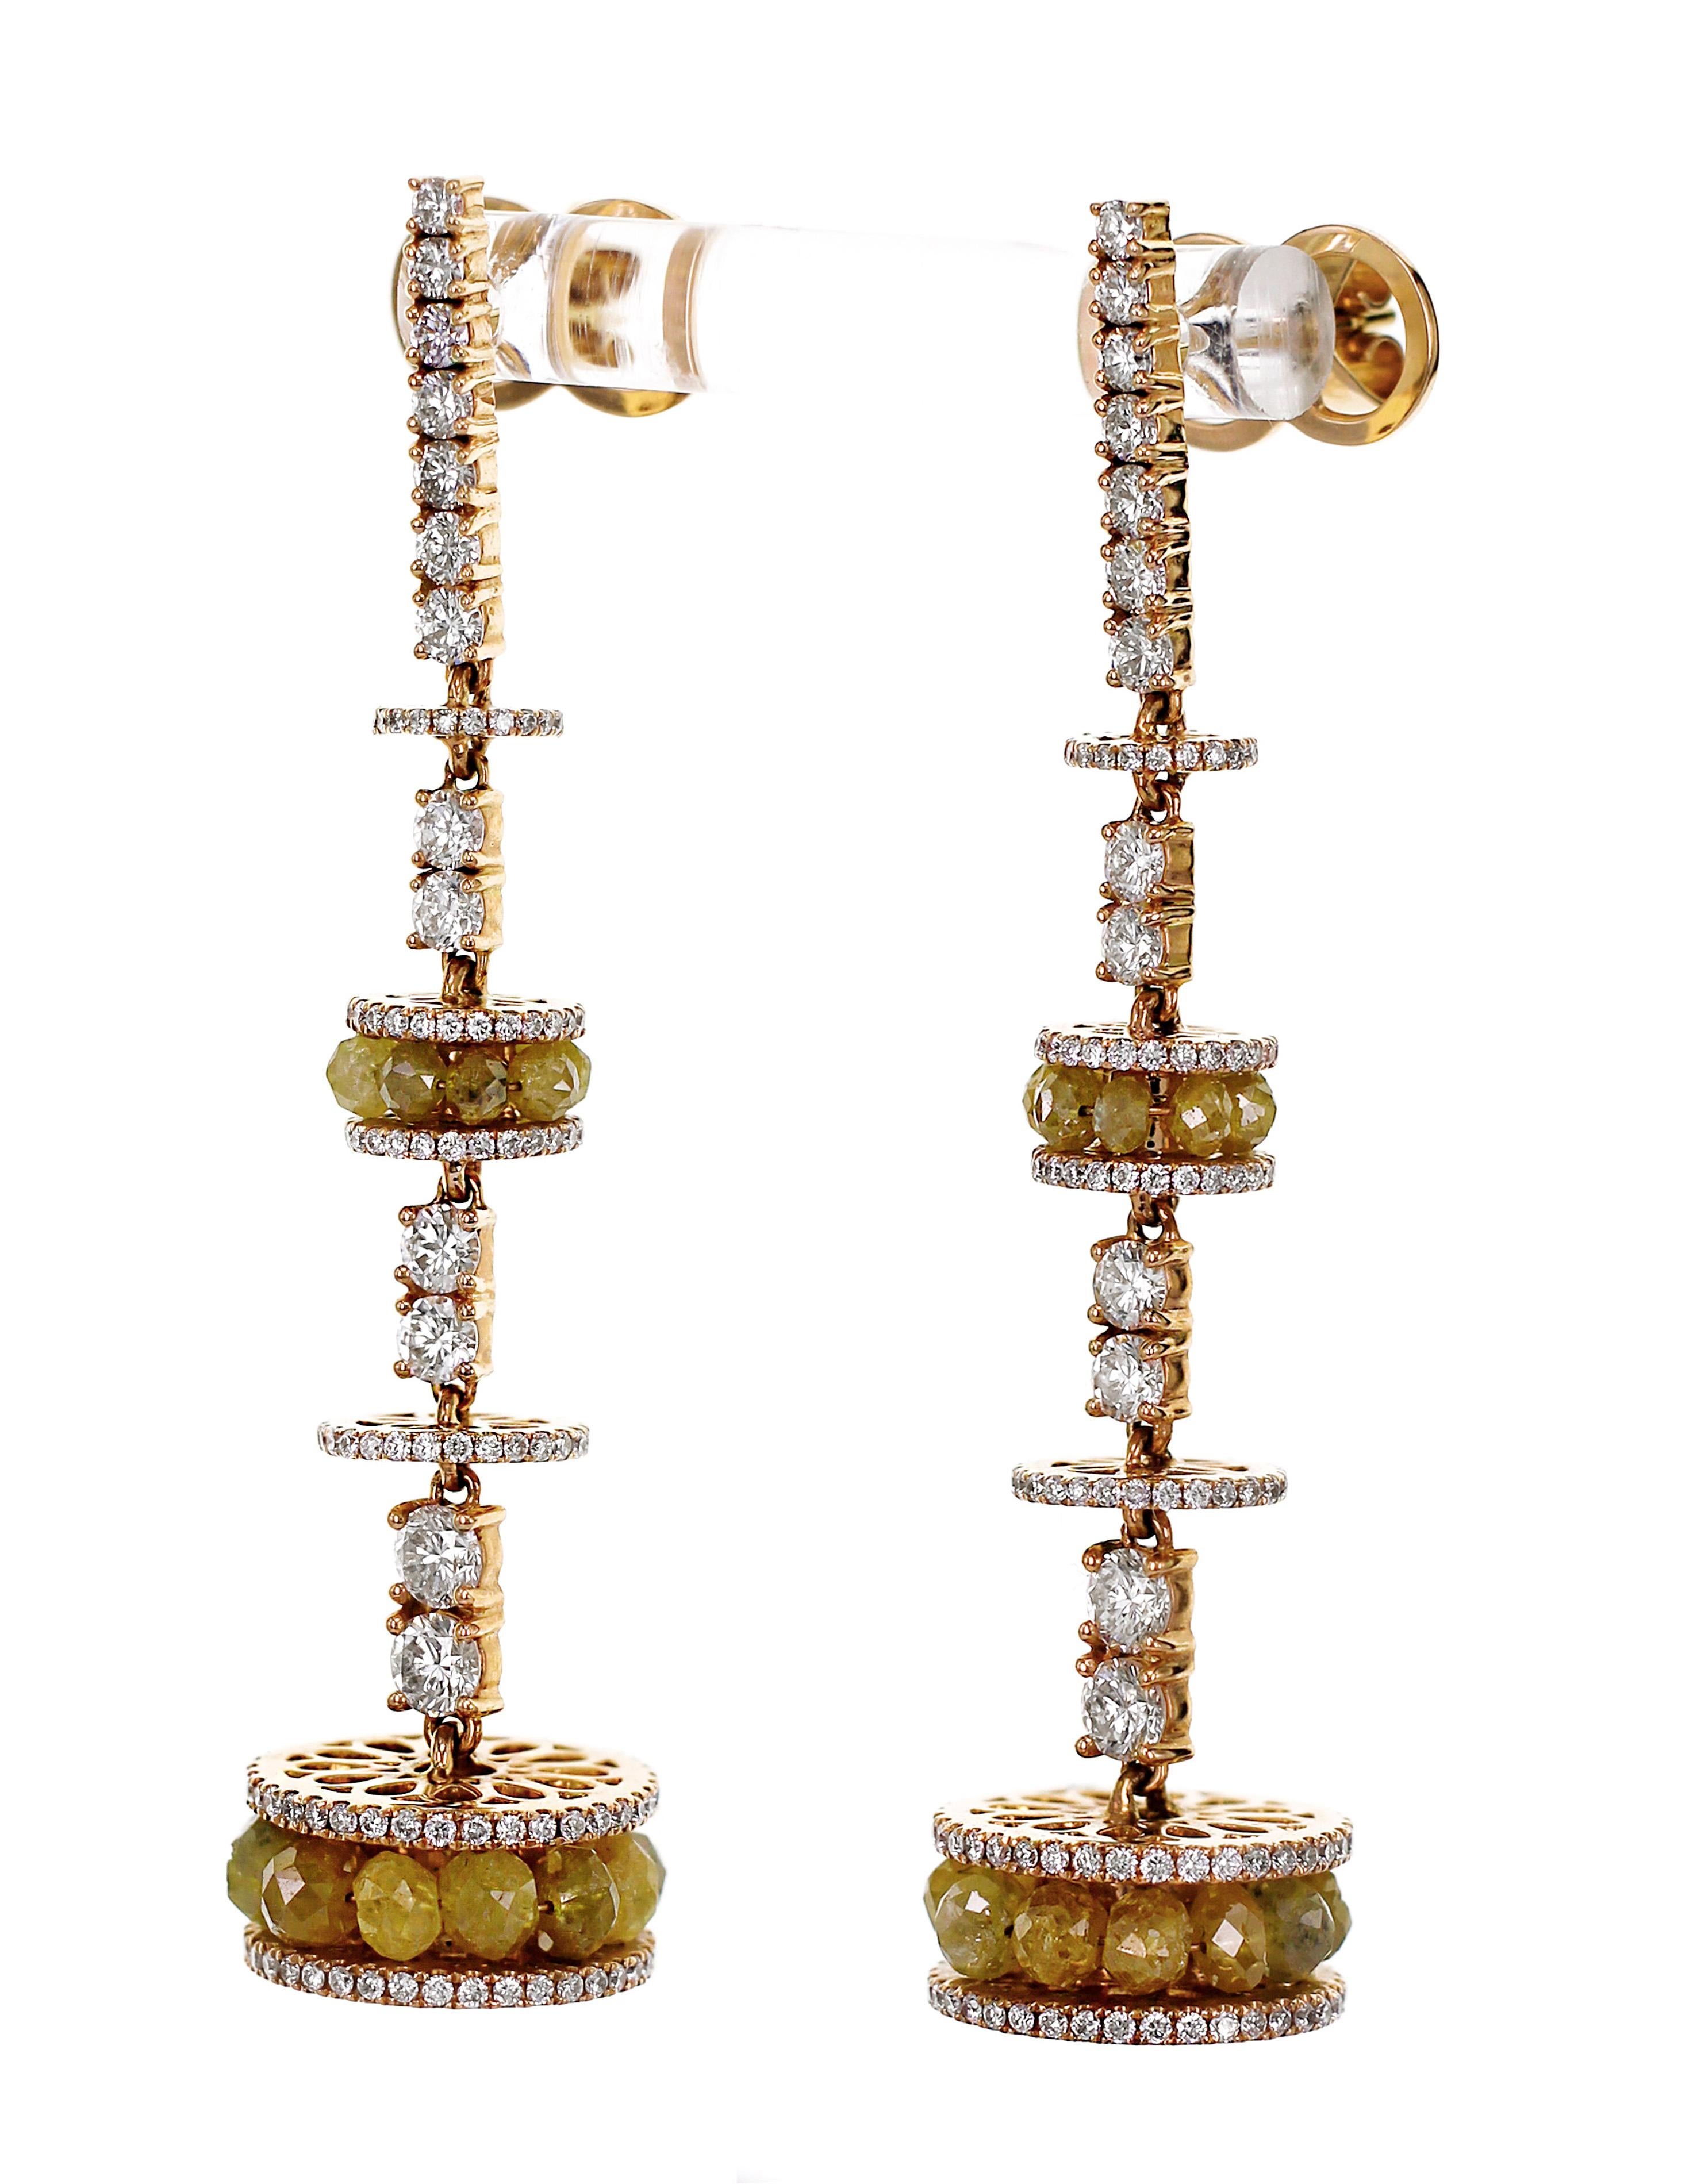 7.61 Carats of Natural Yellow color diamond beads and 2.67 carat of F color VS clarity diamonds are set together in this Chandelier earring. The earring has a lovely fall and is a perfect earring for a cocktail event.